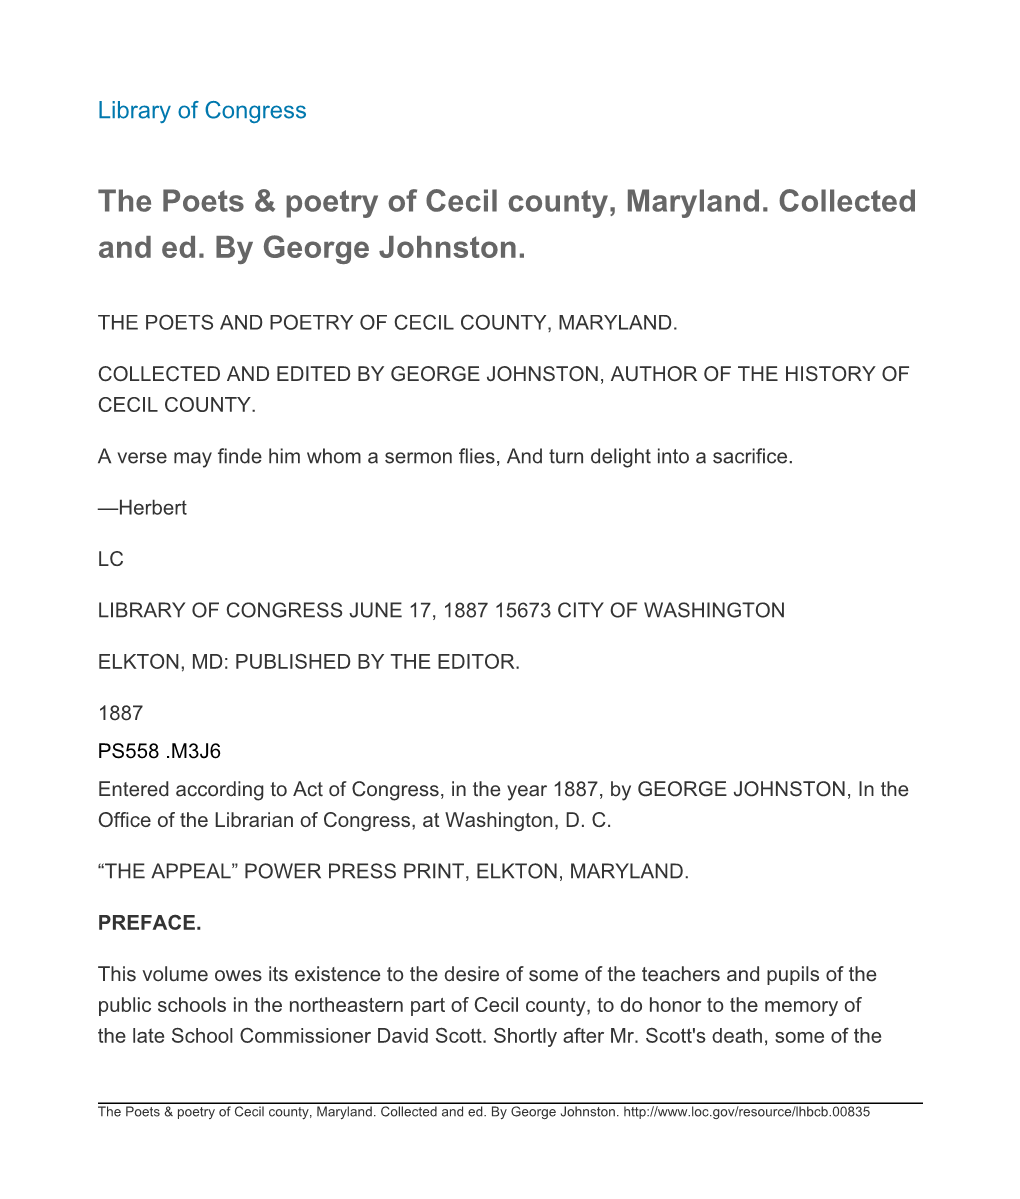 The Poets & Poetry of Cecil County, Maryland